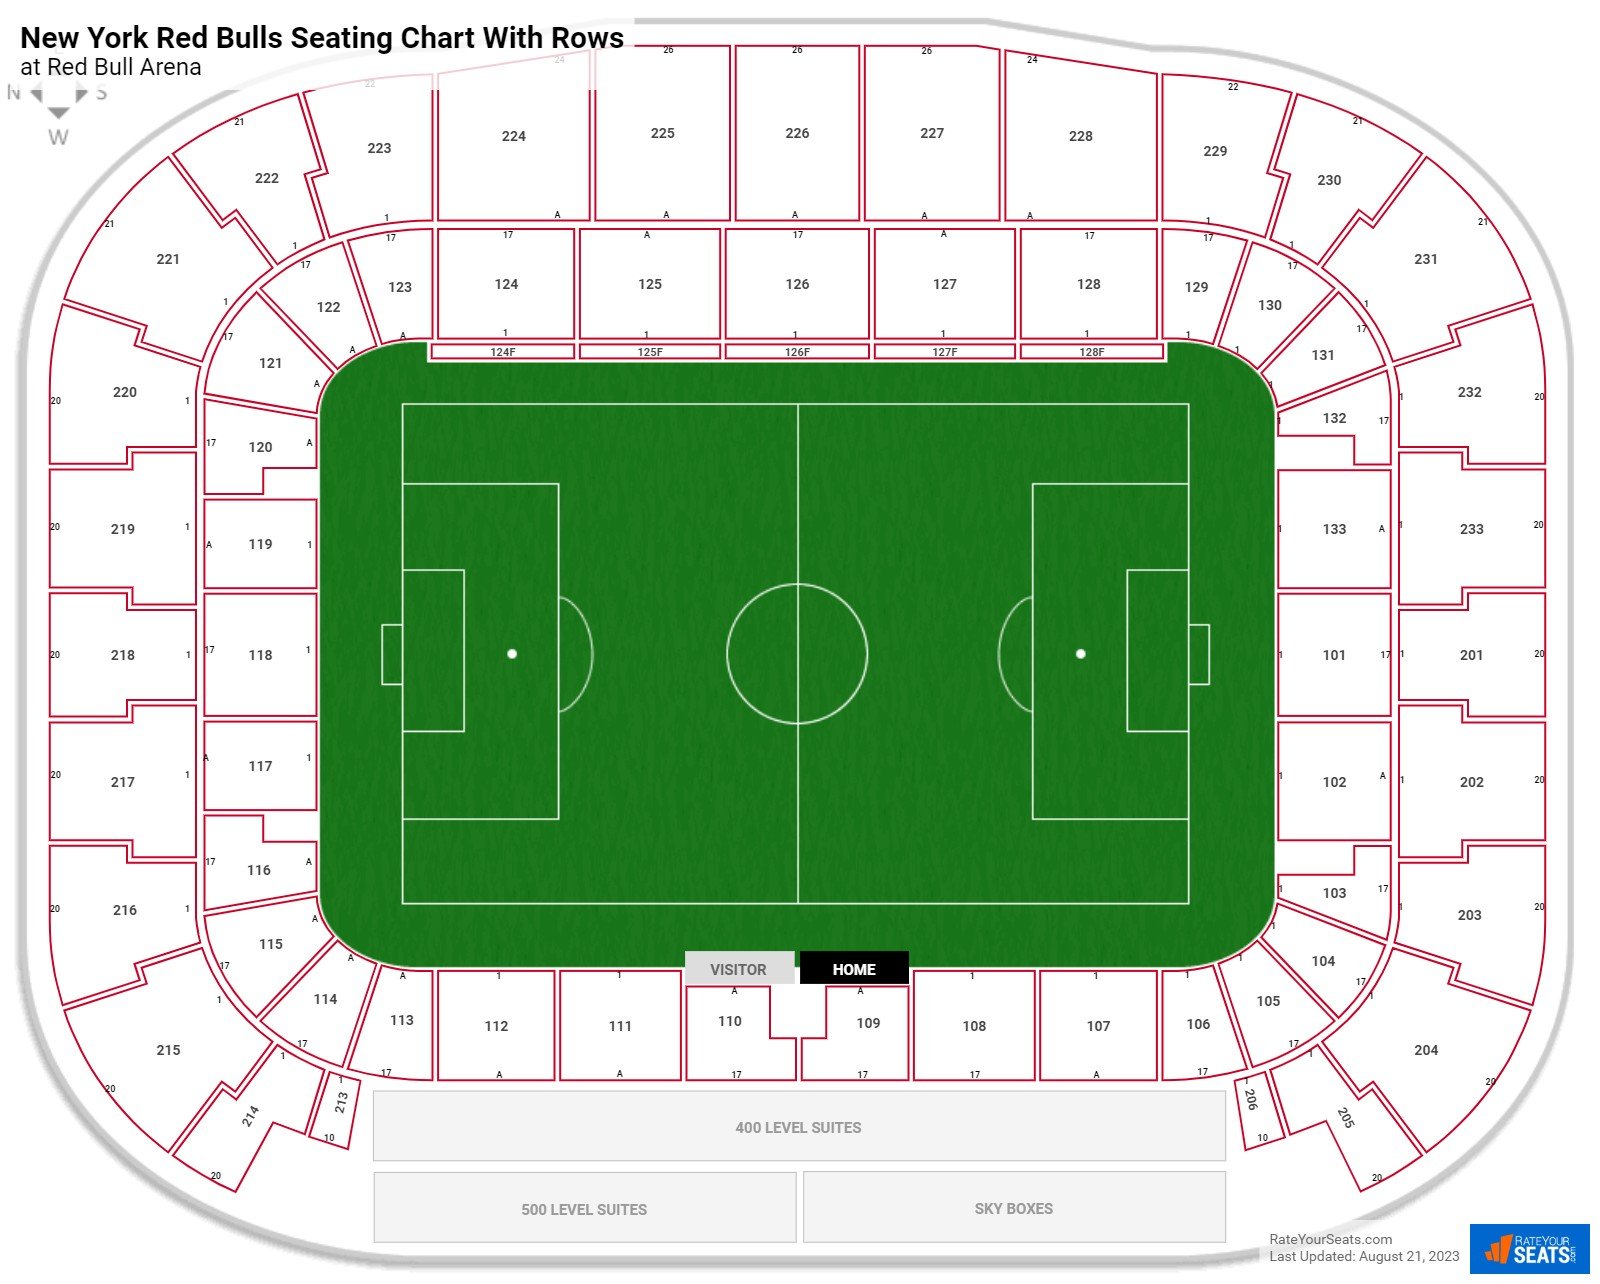 Red Bull Arena Seating for Red Bulls Games - RateYourSeats.com